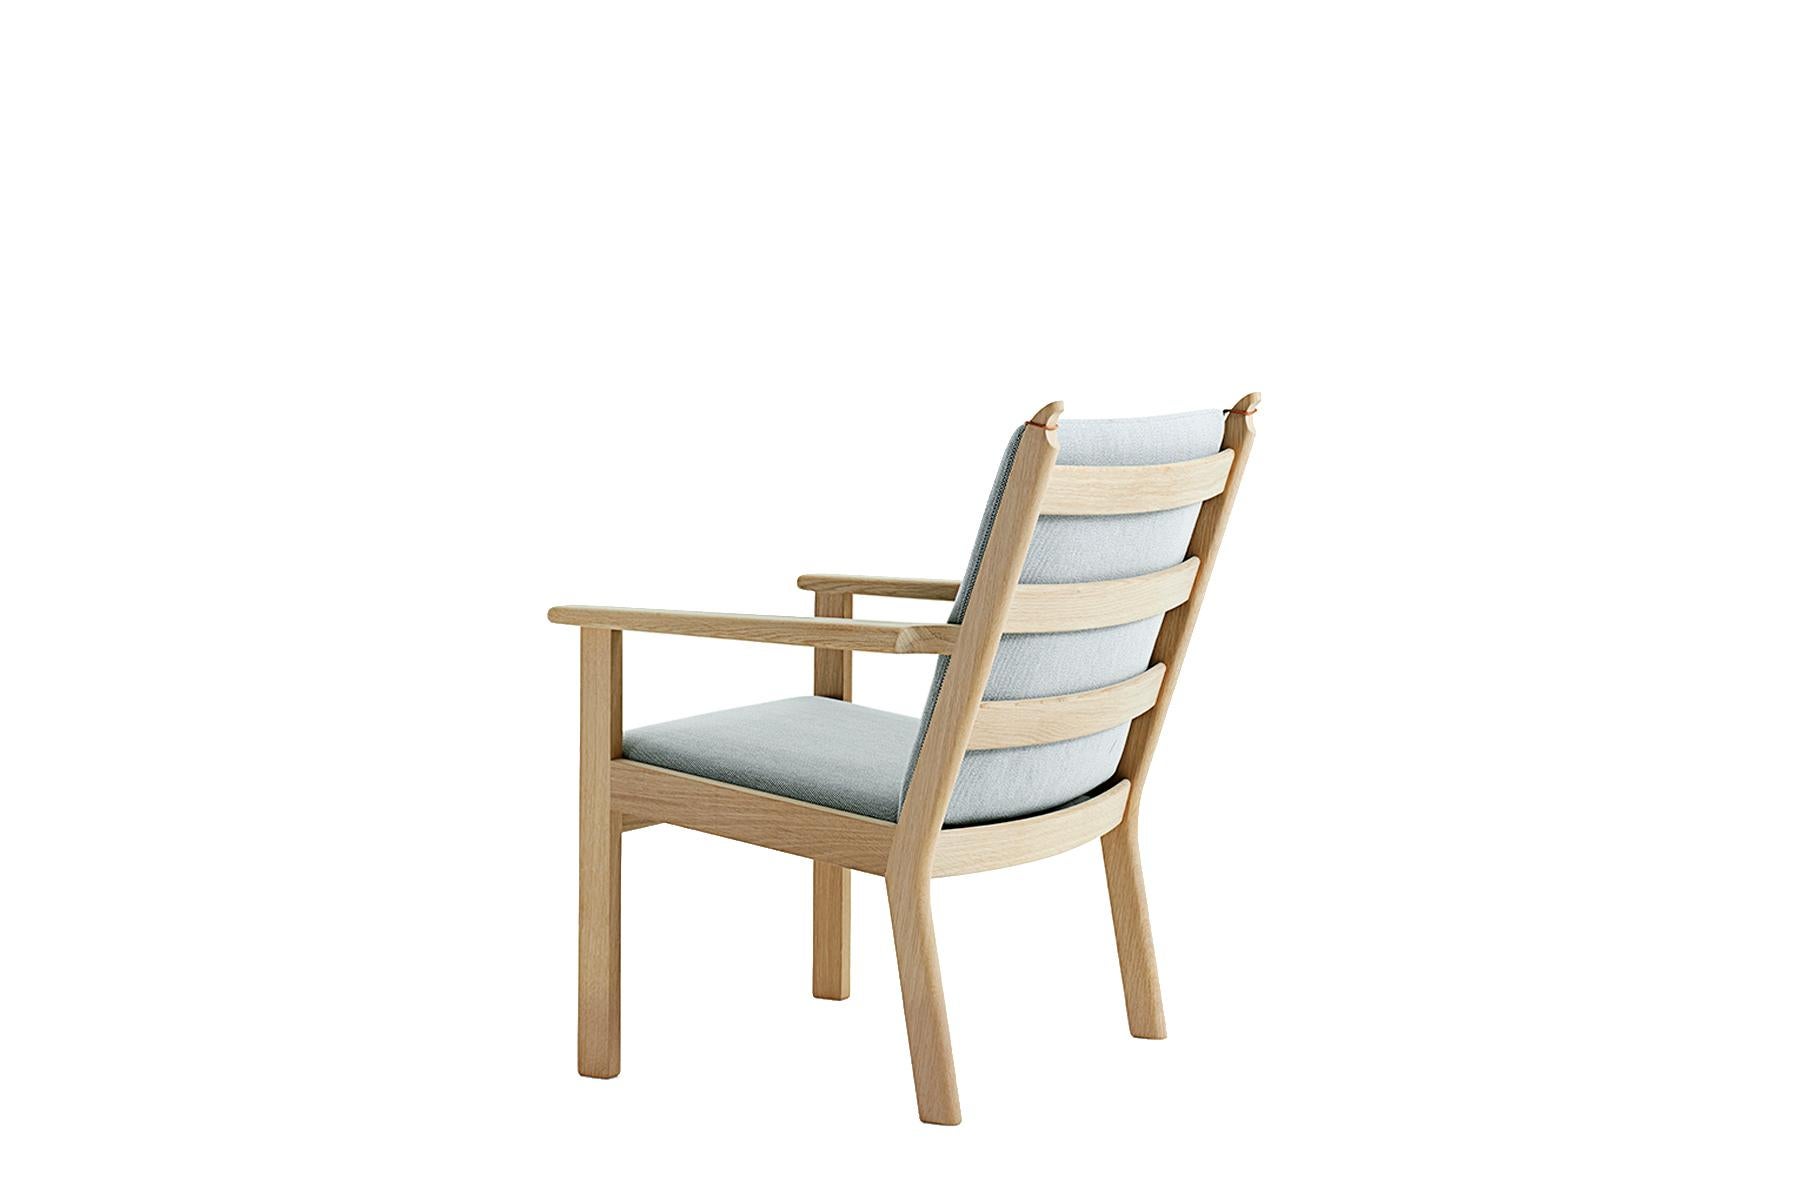 Designed by Hans Wegner, the 284 lounge chair provides clean, crisp lines for the modern home. The chair is handcrafted at GETAMA’s factory in Gedsted, Denmark by skilled cabinetmakers using traditional Scandinavian techniques. 

Available